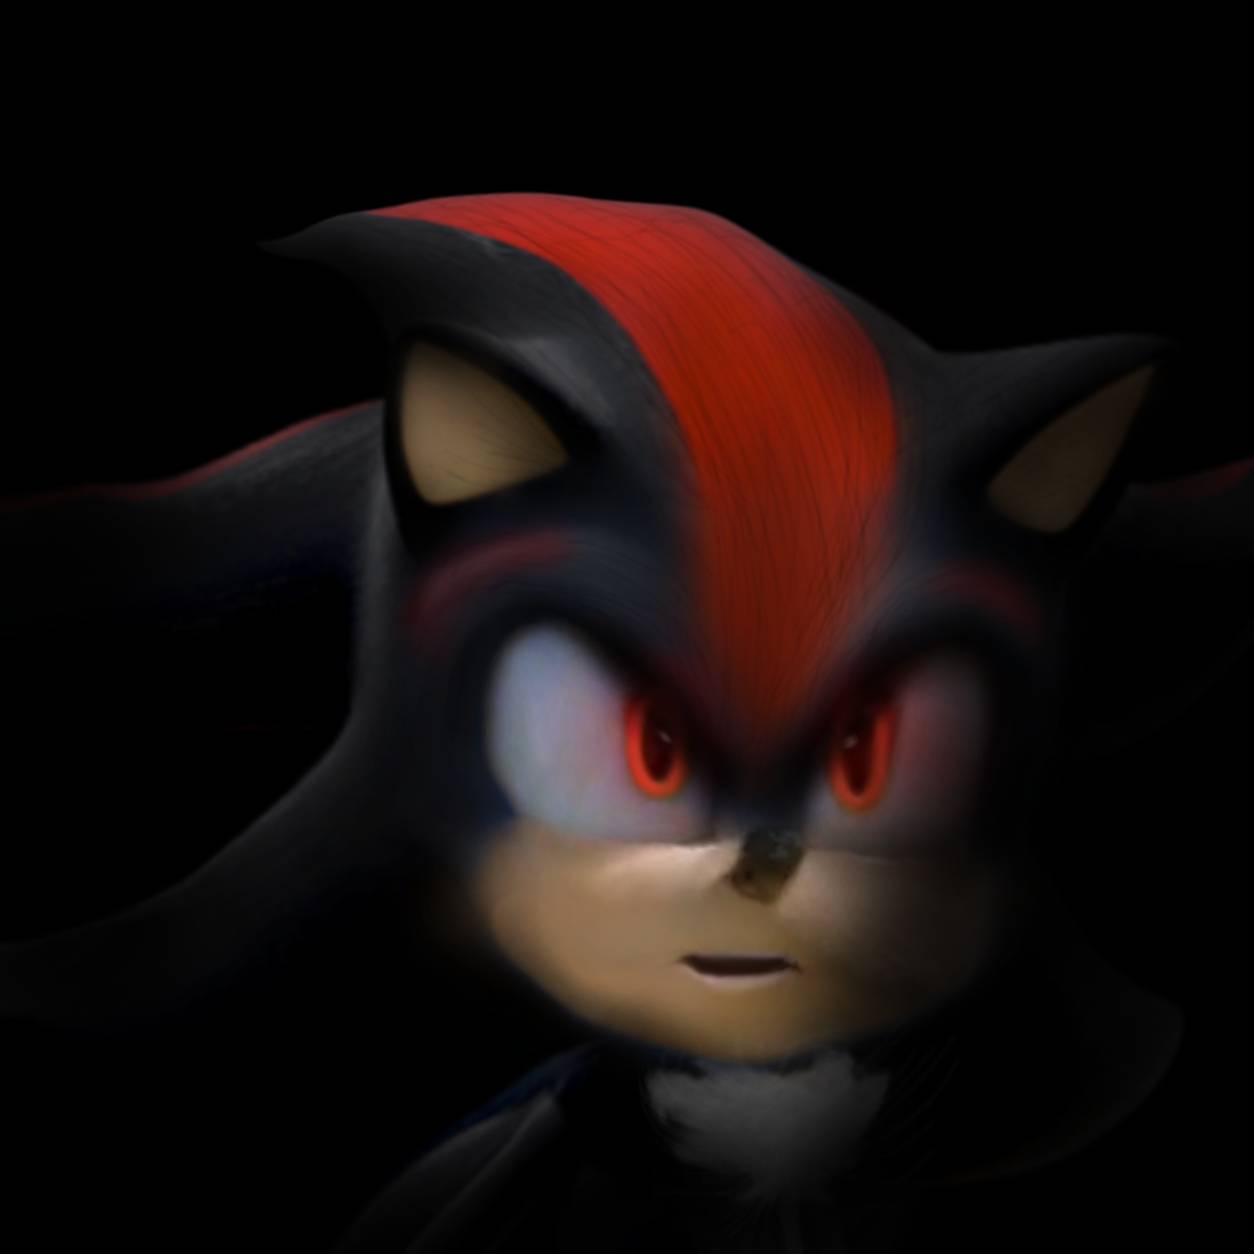 SONIC THE HEDGEHOG 3 (2024) - Project Shadow Emerges 